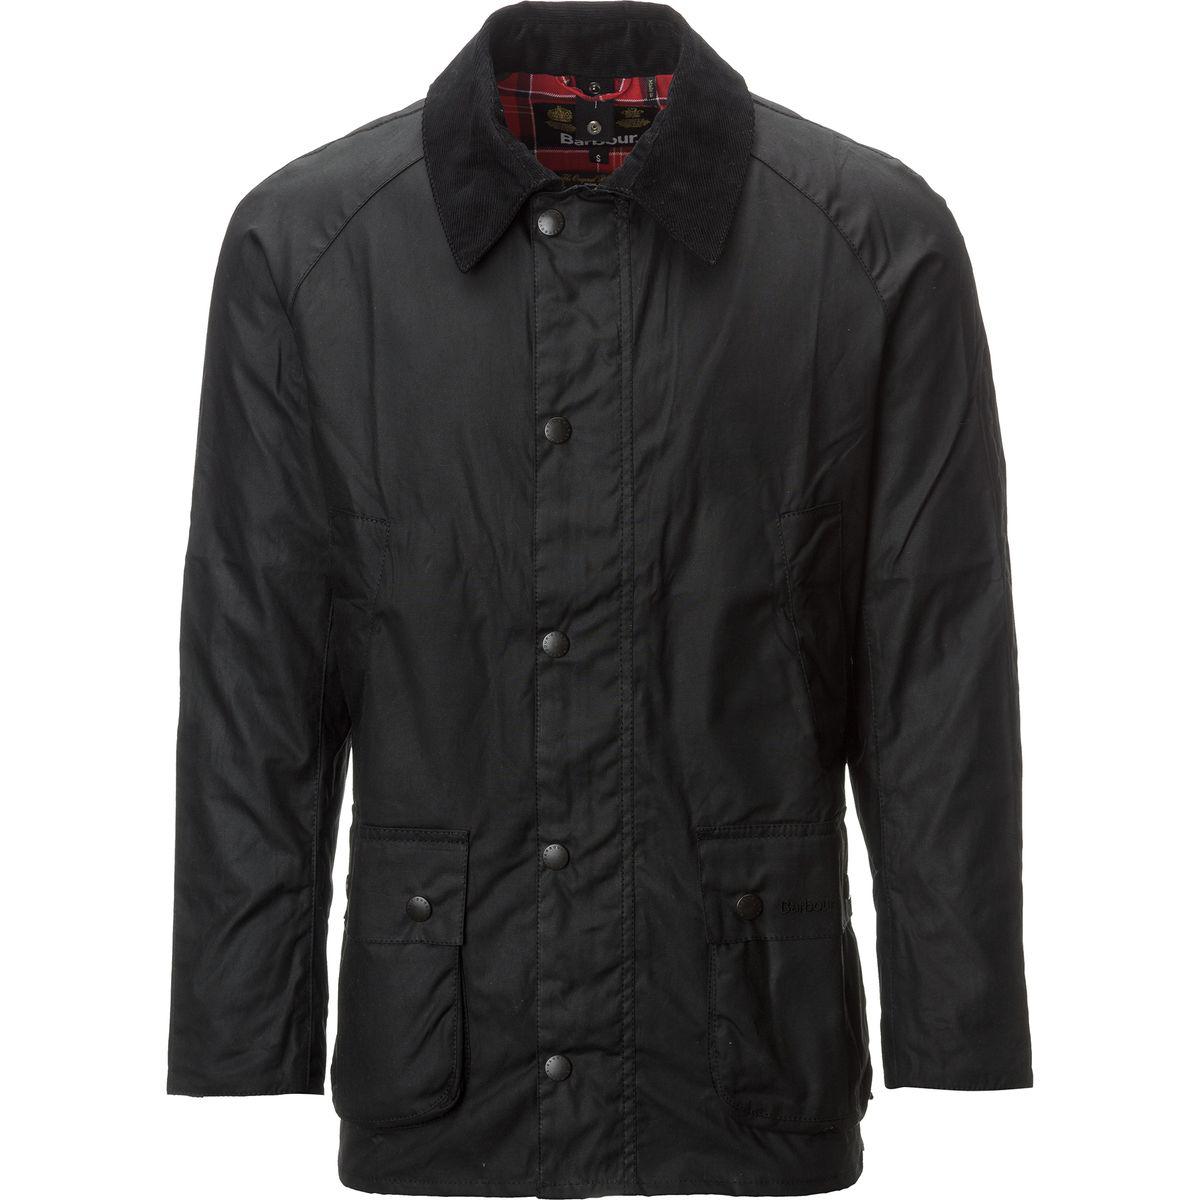 Barbour Ashby Wax Jacket in Black for Men - Lyst